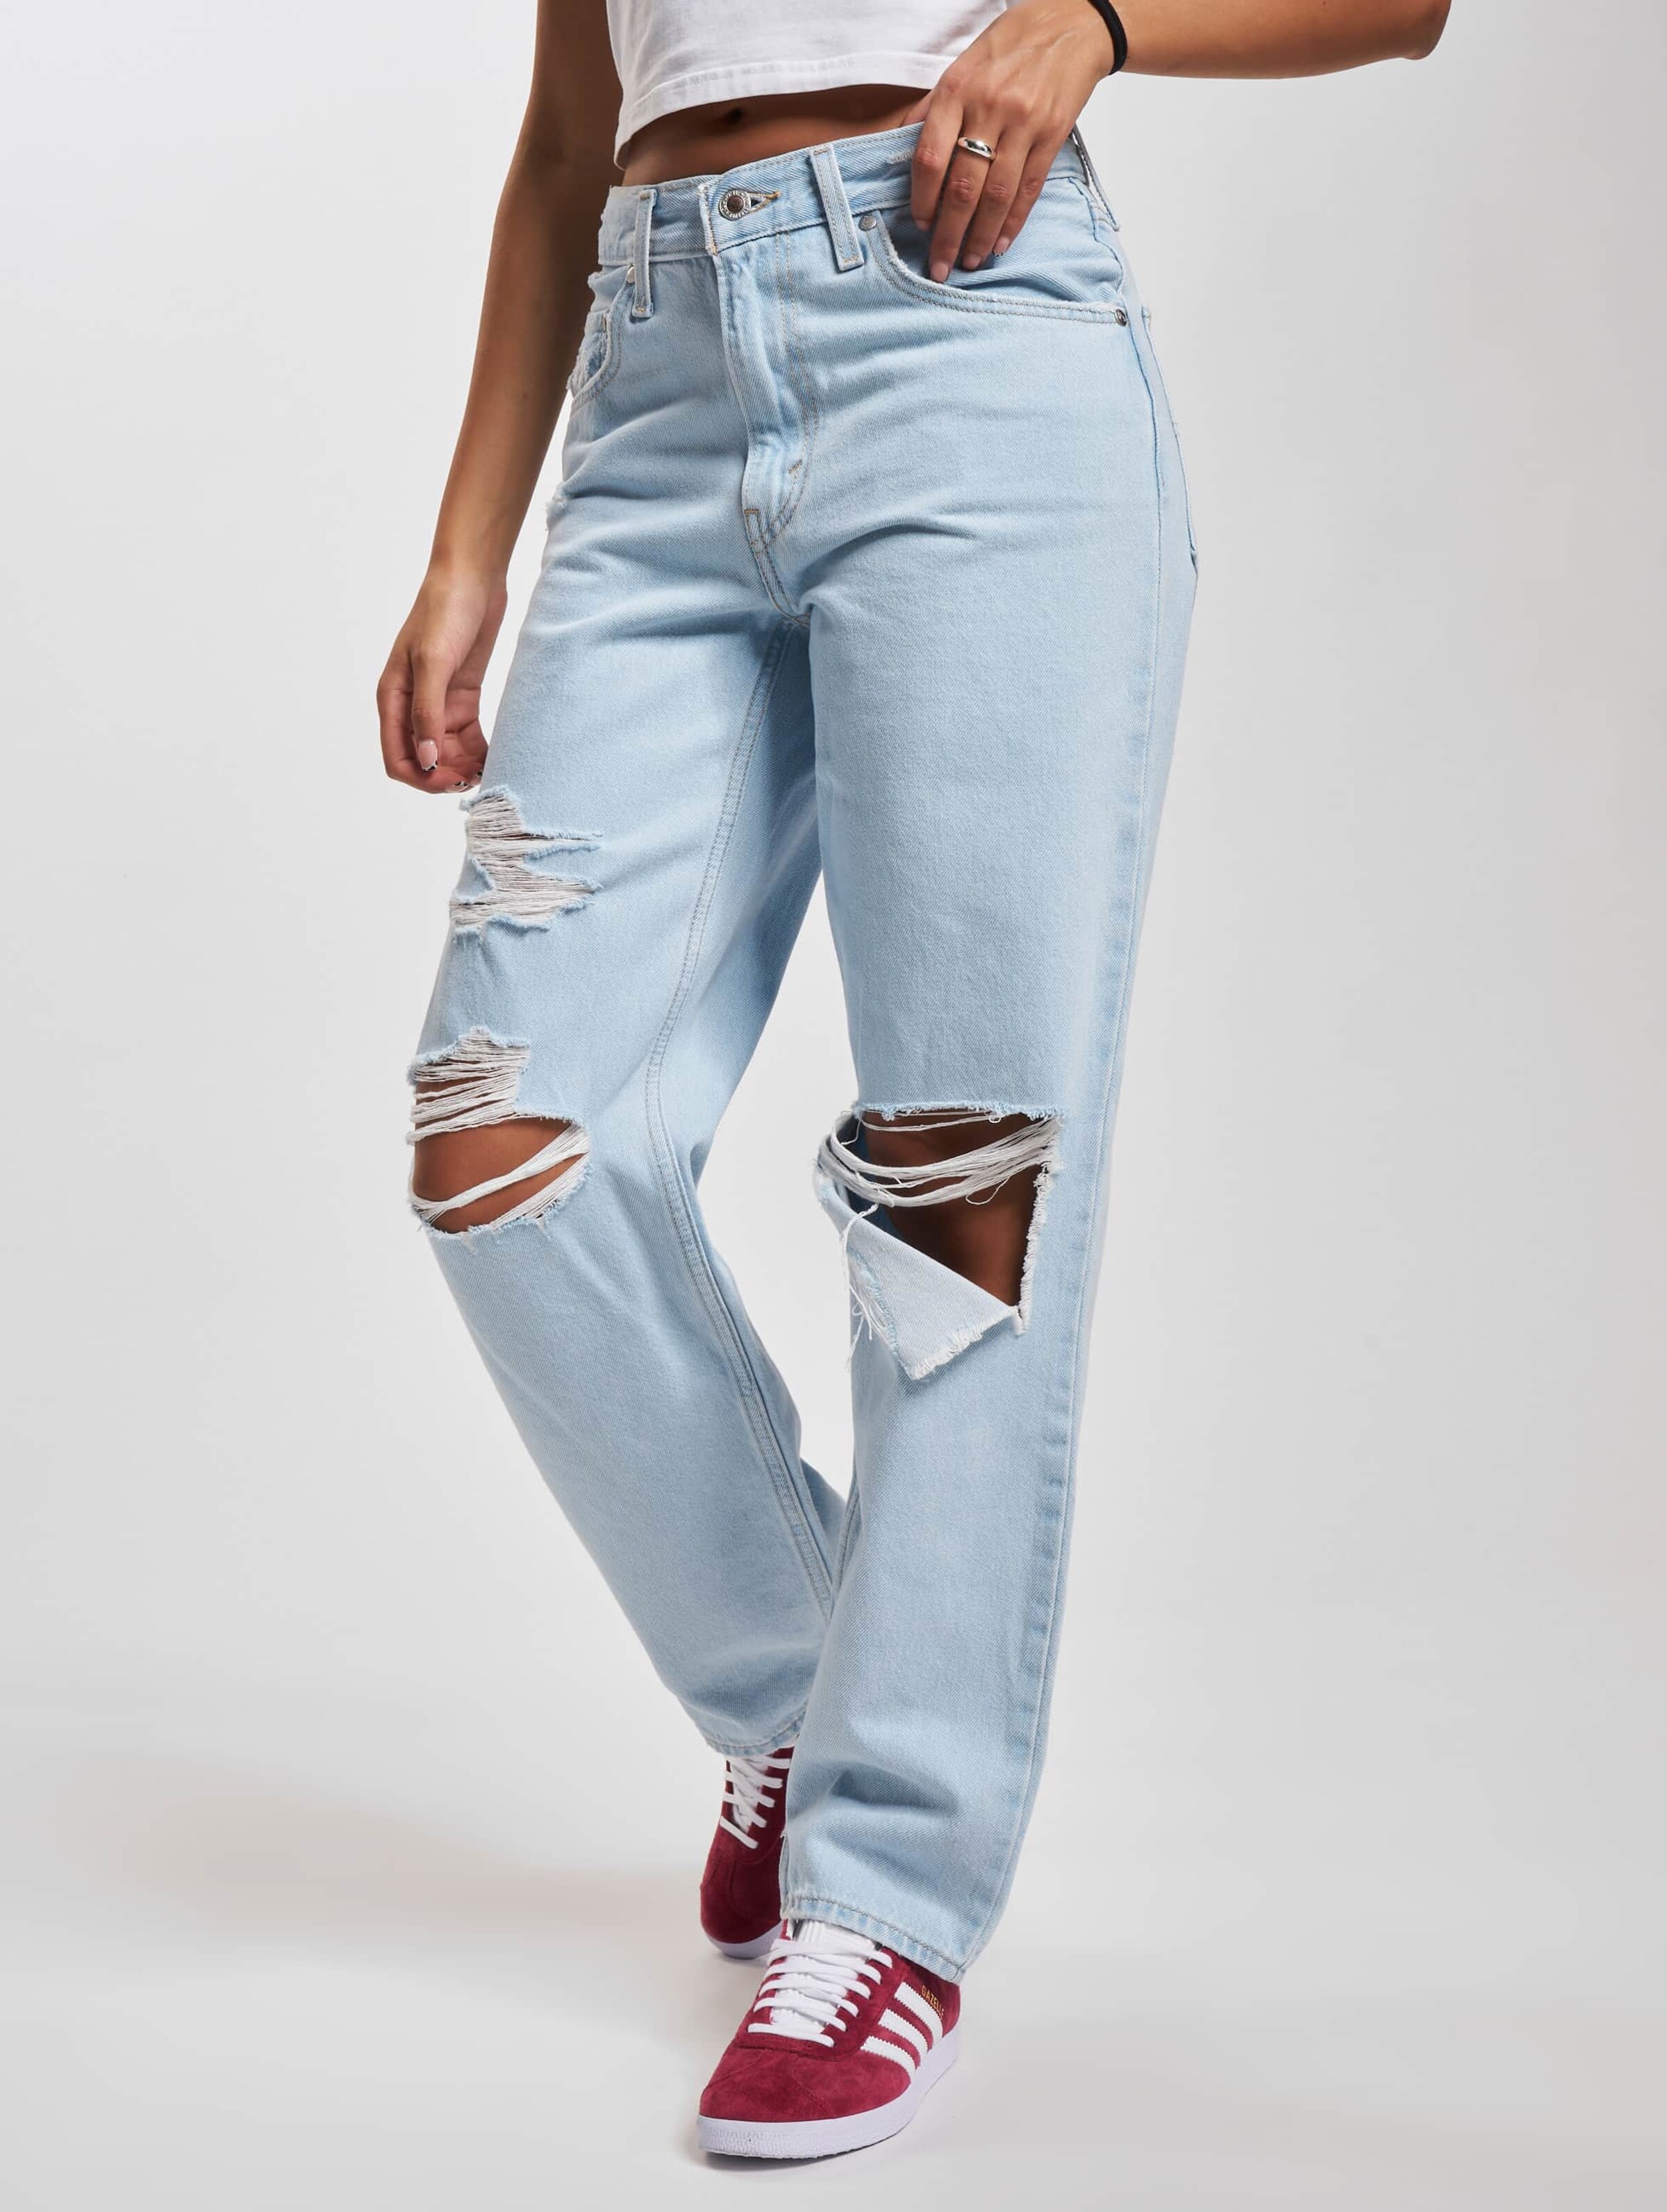 Top more than 134 levi’s baggy fit jeans best